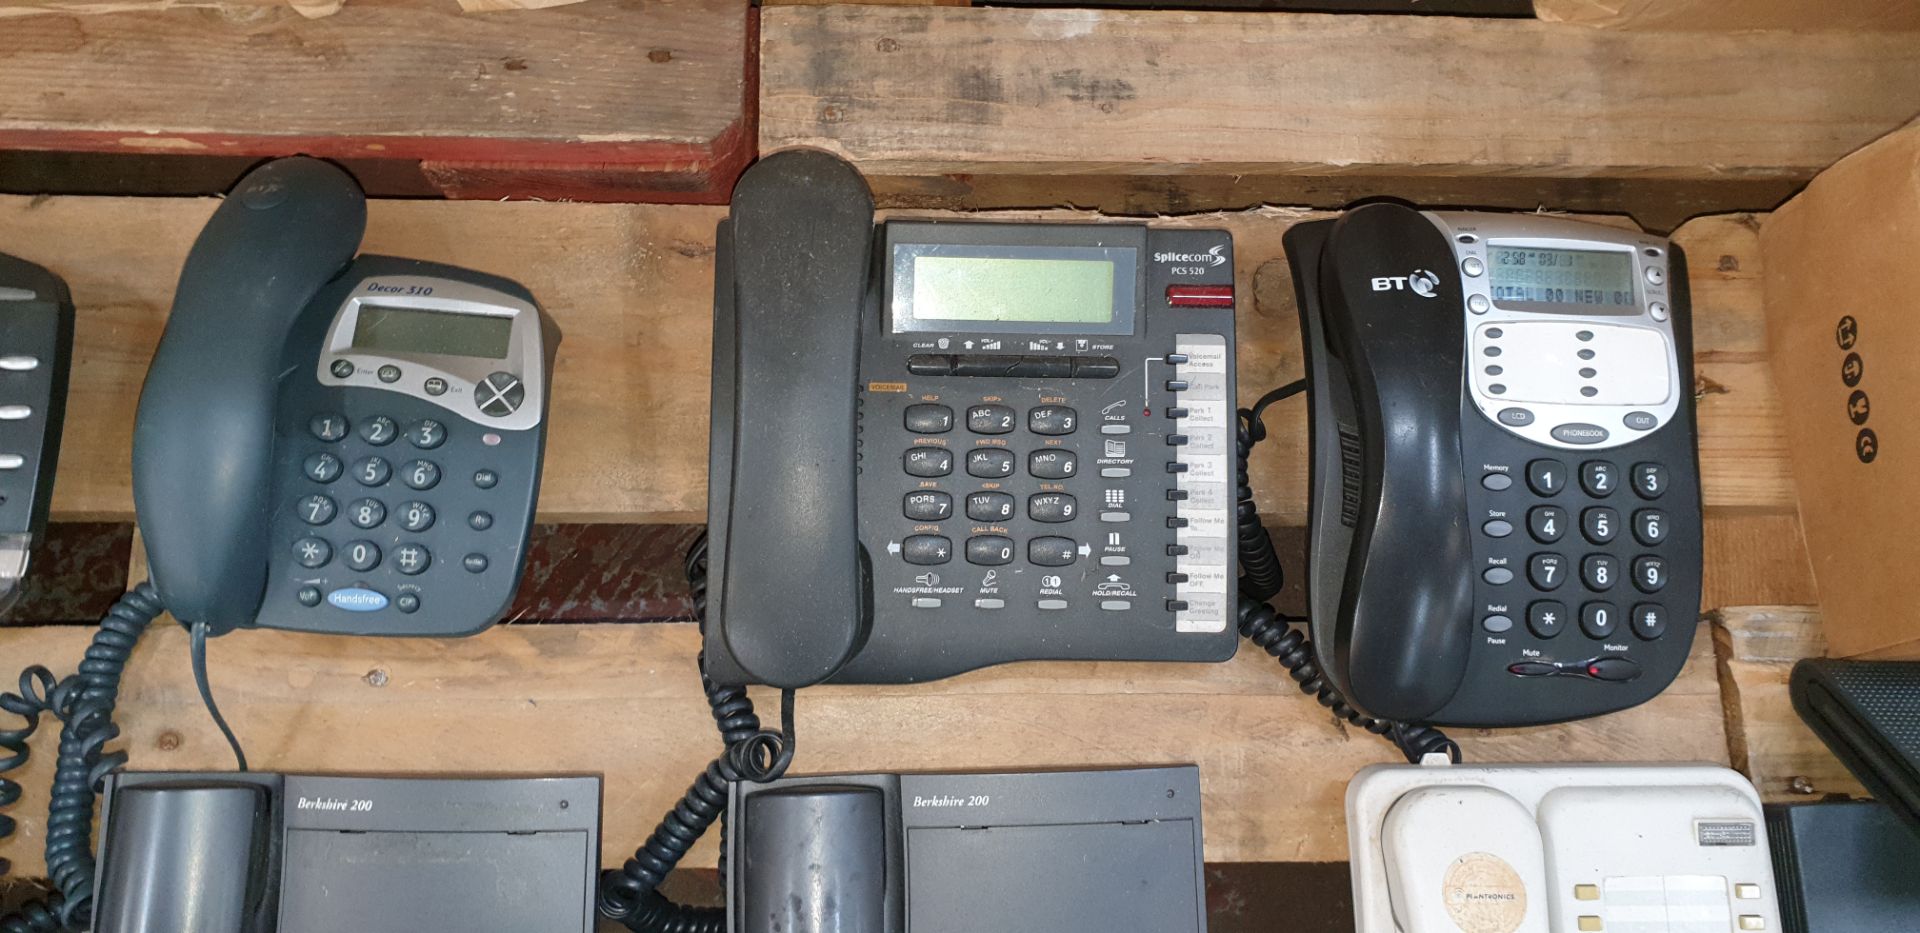 16 off assorted telephone handsets by Polycom, Cisco, Splicecom, Nortel & others - Image 8 of 8